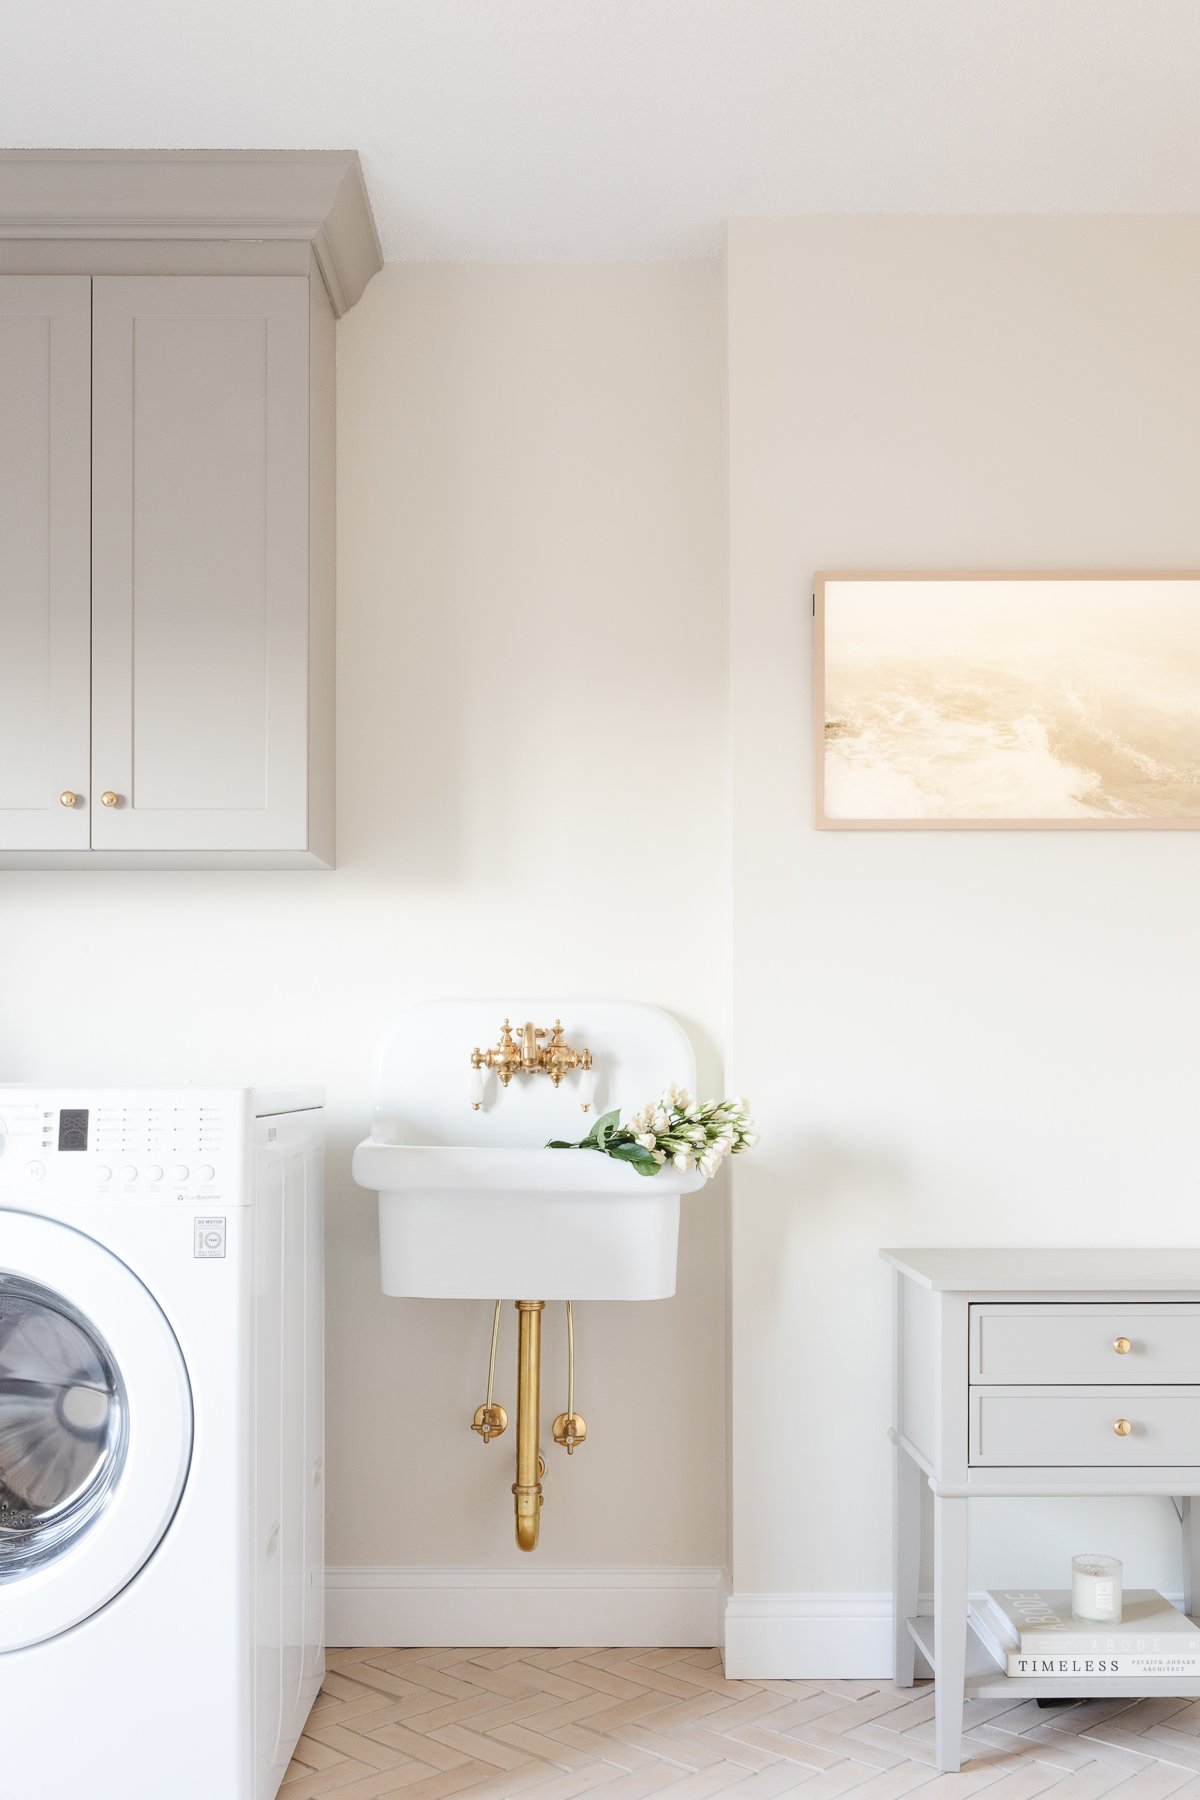 A laundry room with a white washer and dryer and a wall mount farmhouse sink.